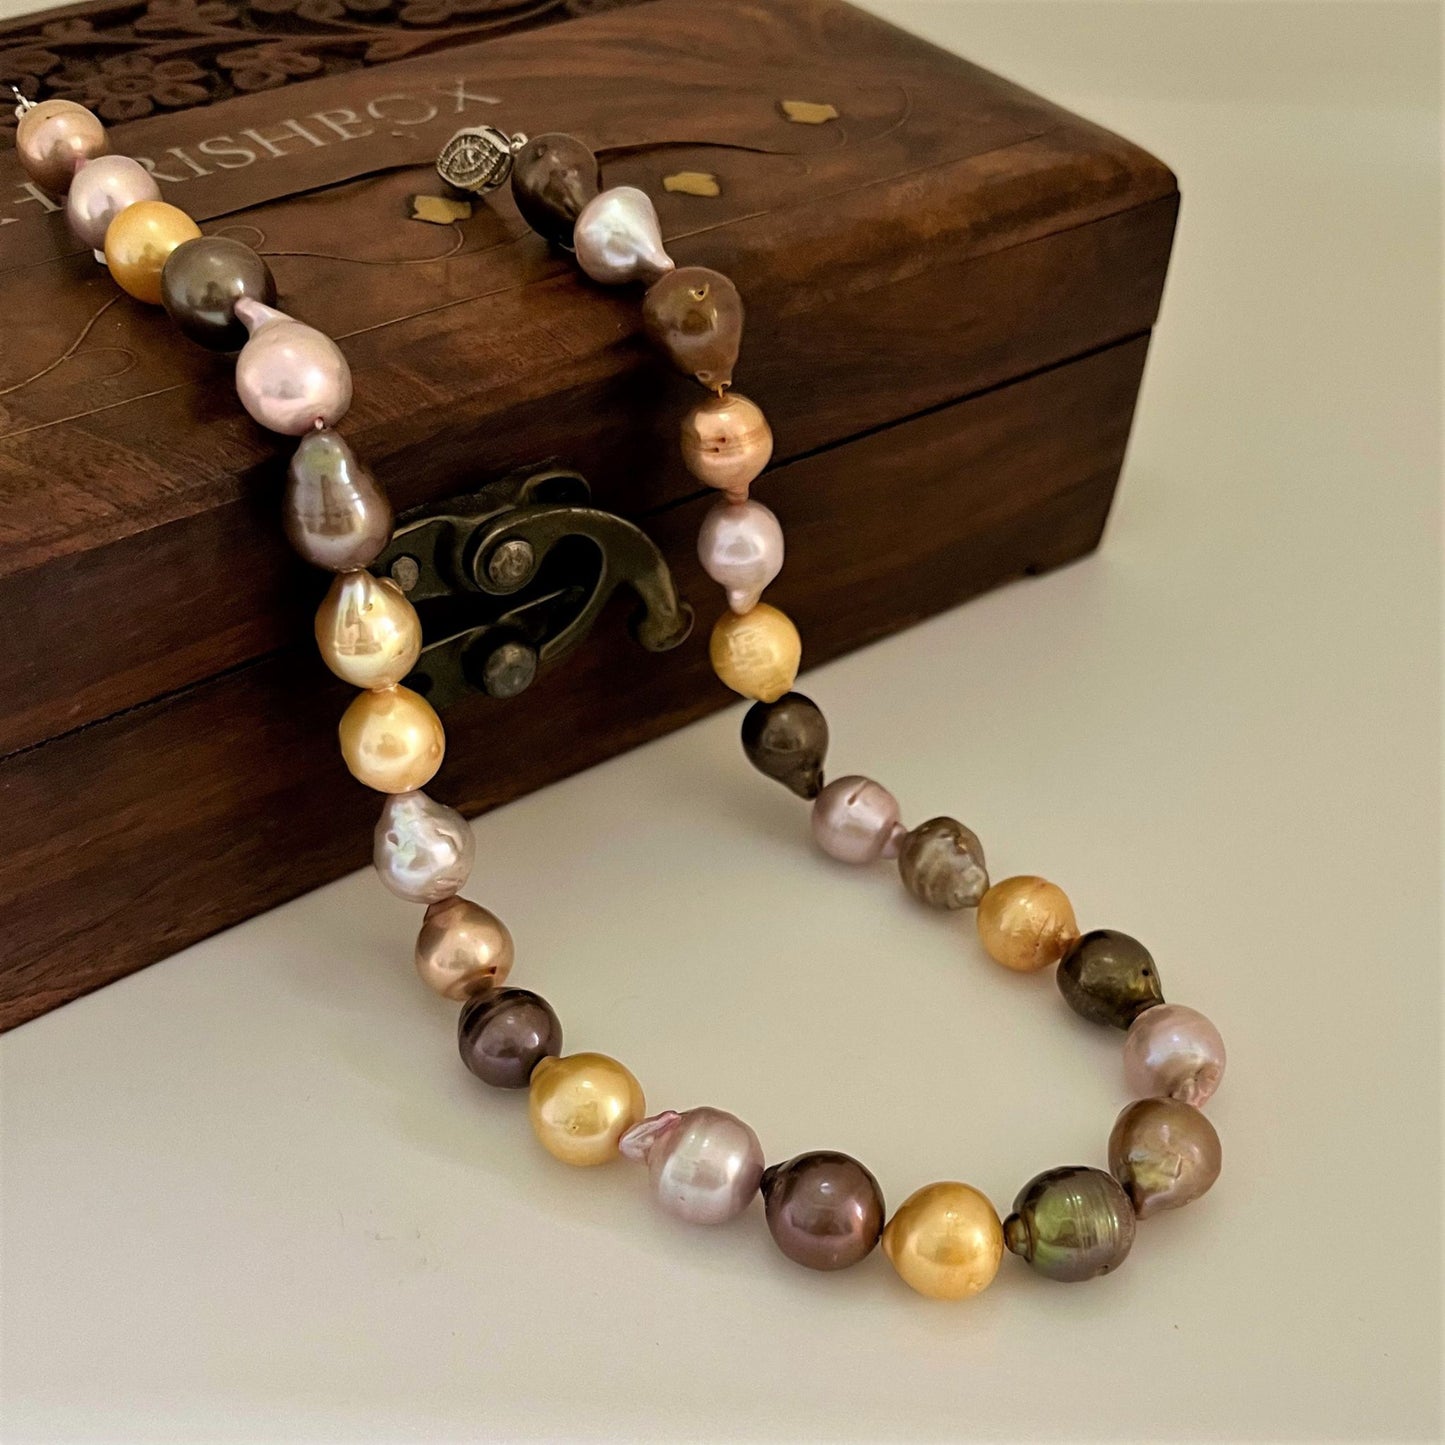 Baroque Pearl Necklace in Shade of Gold - CherishBox  